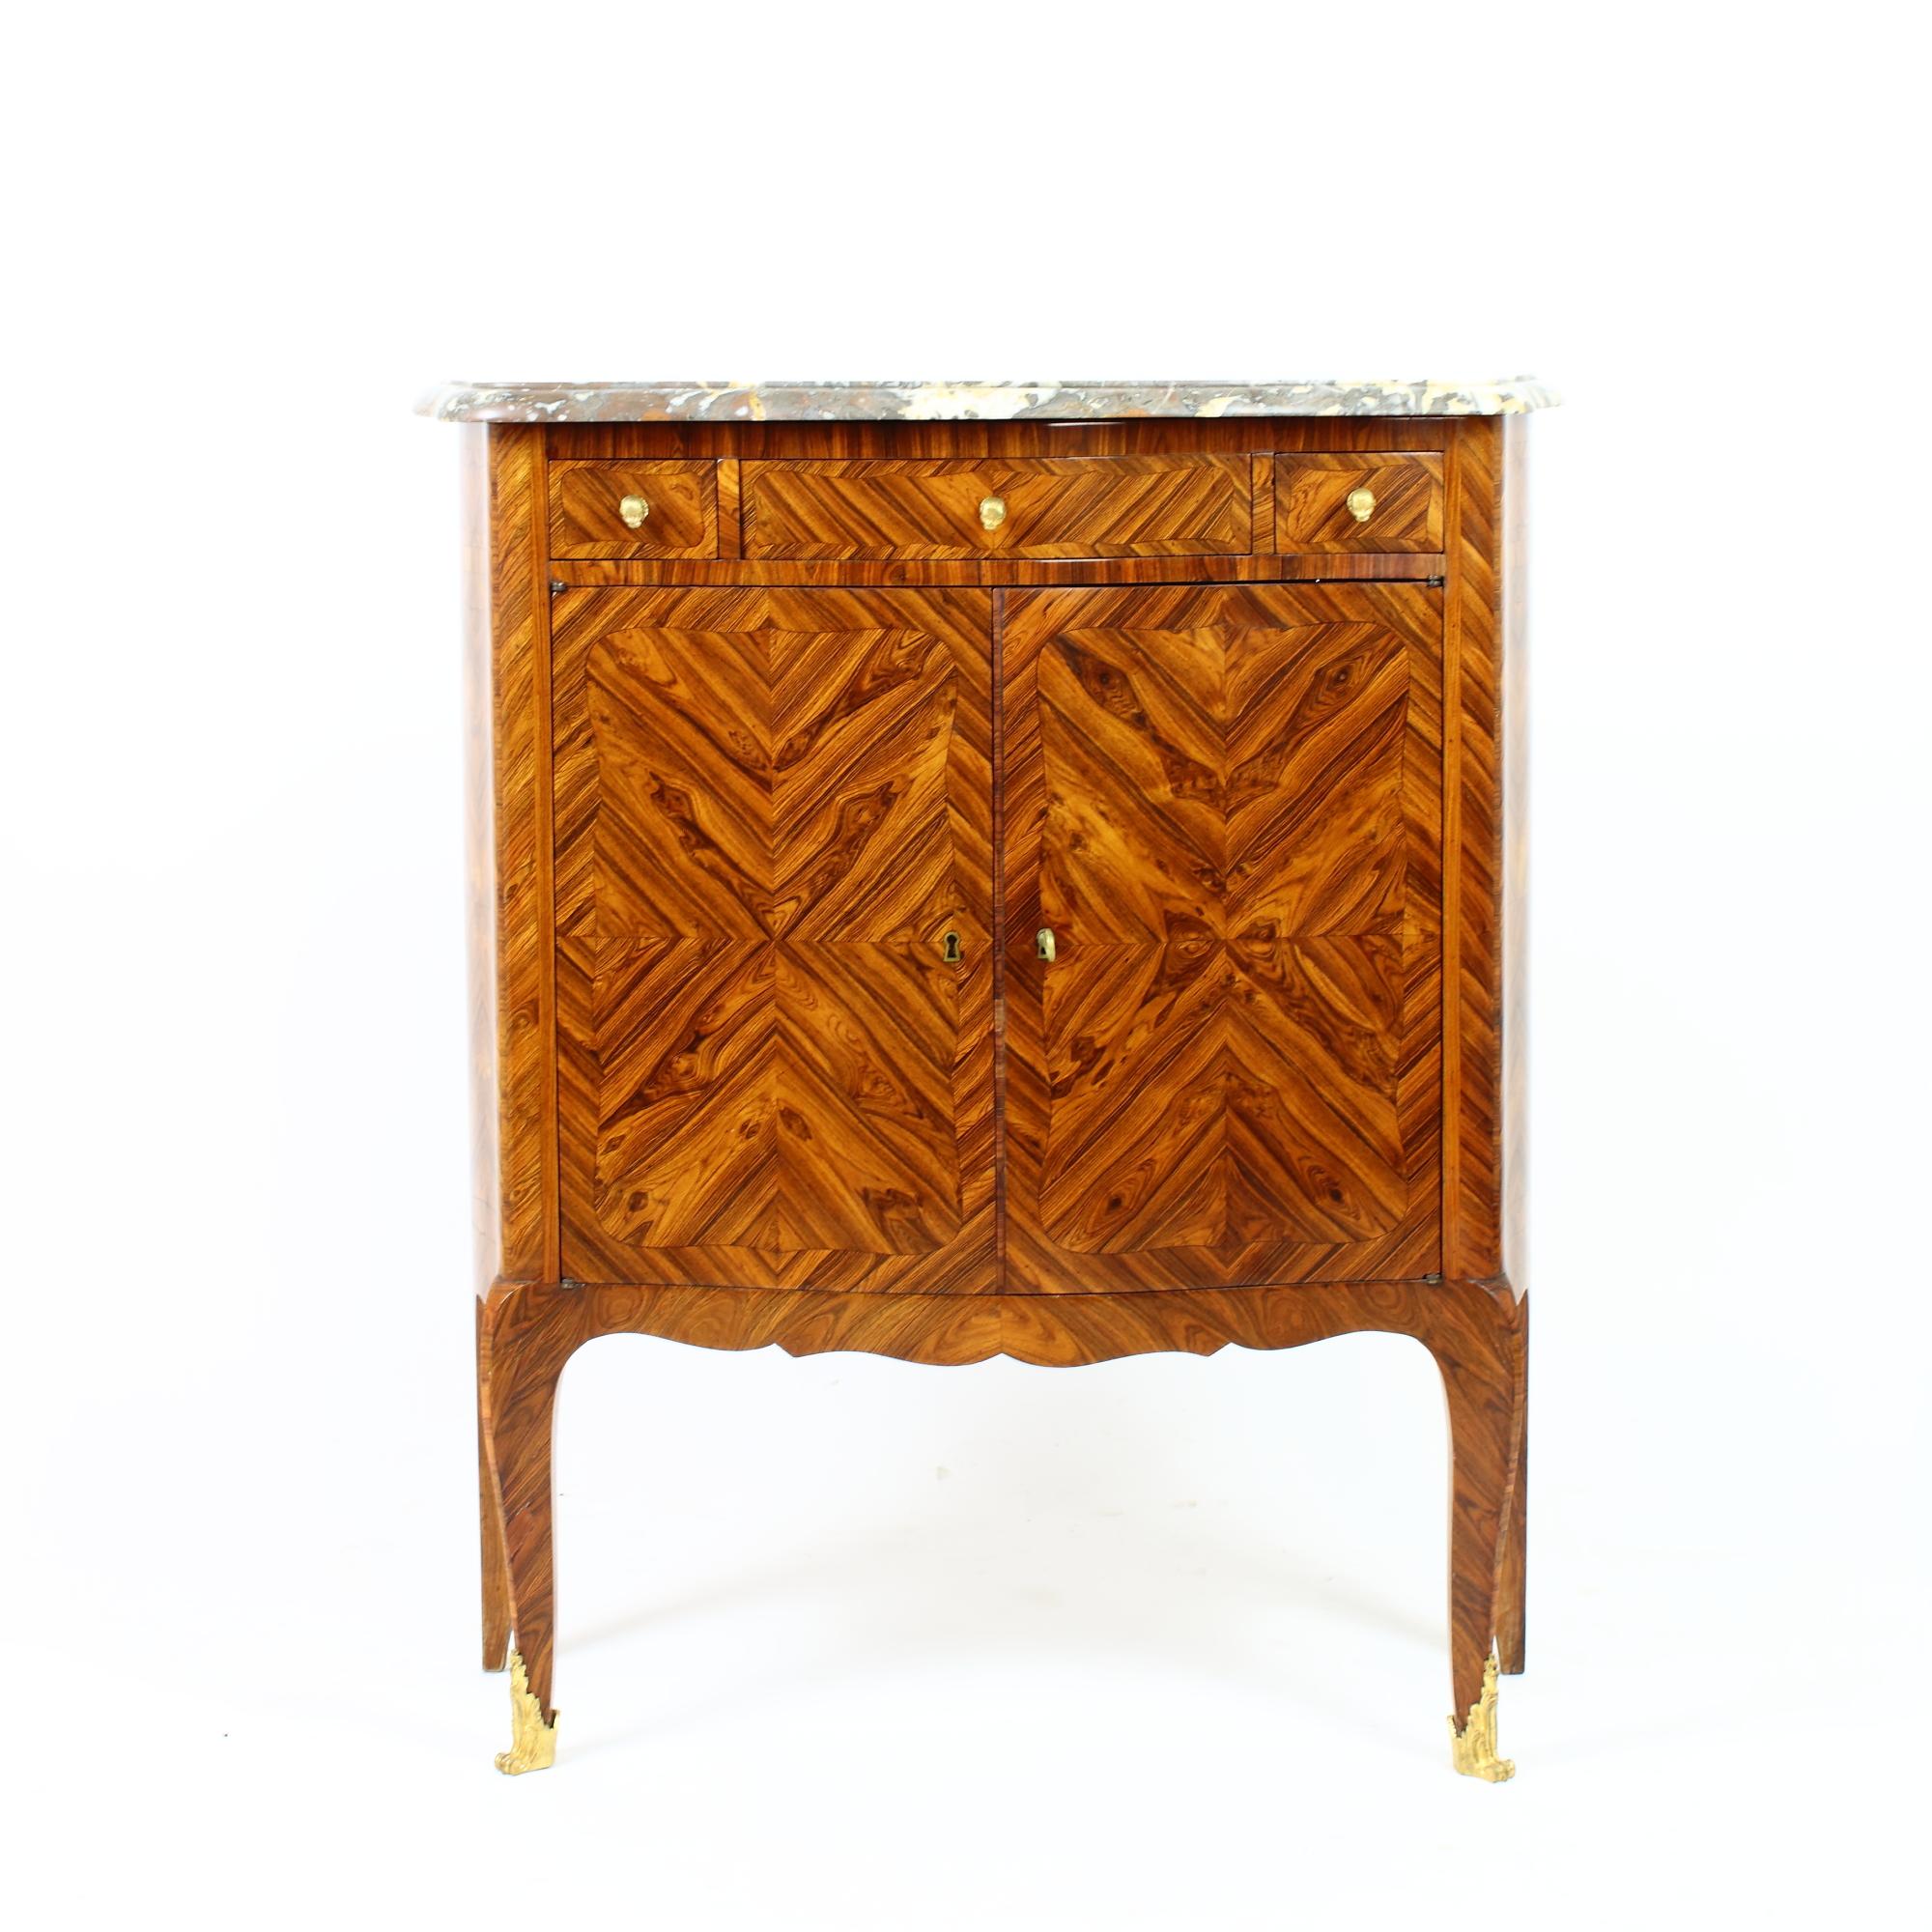 Small cabinet with curved front and sides standing on small cabriole legs with bronze sabots. Two doors with marquetry 